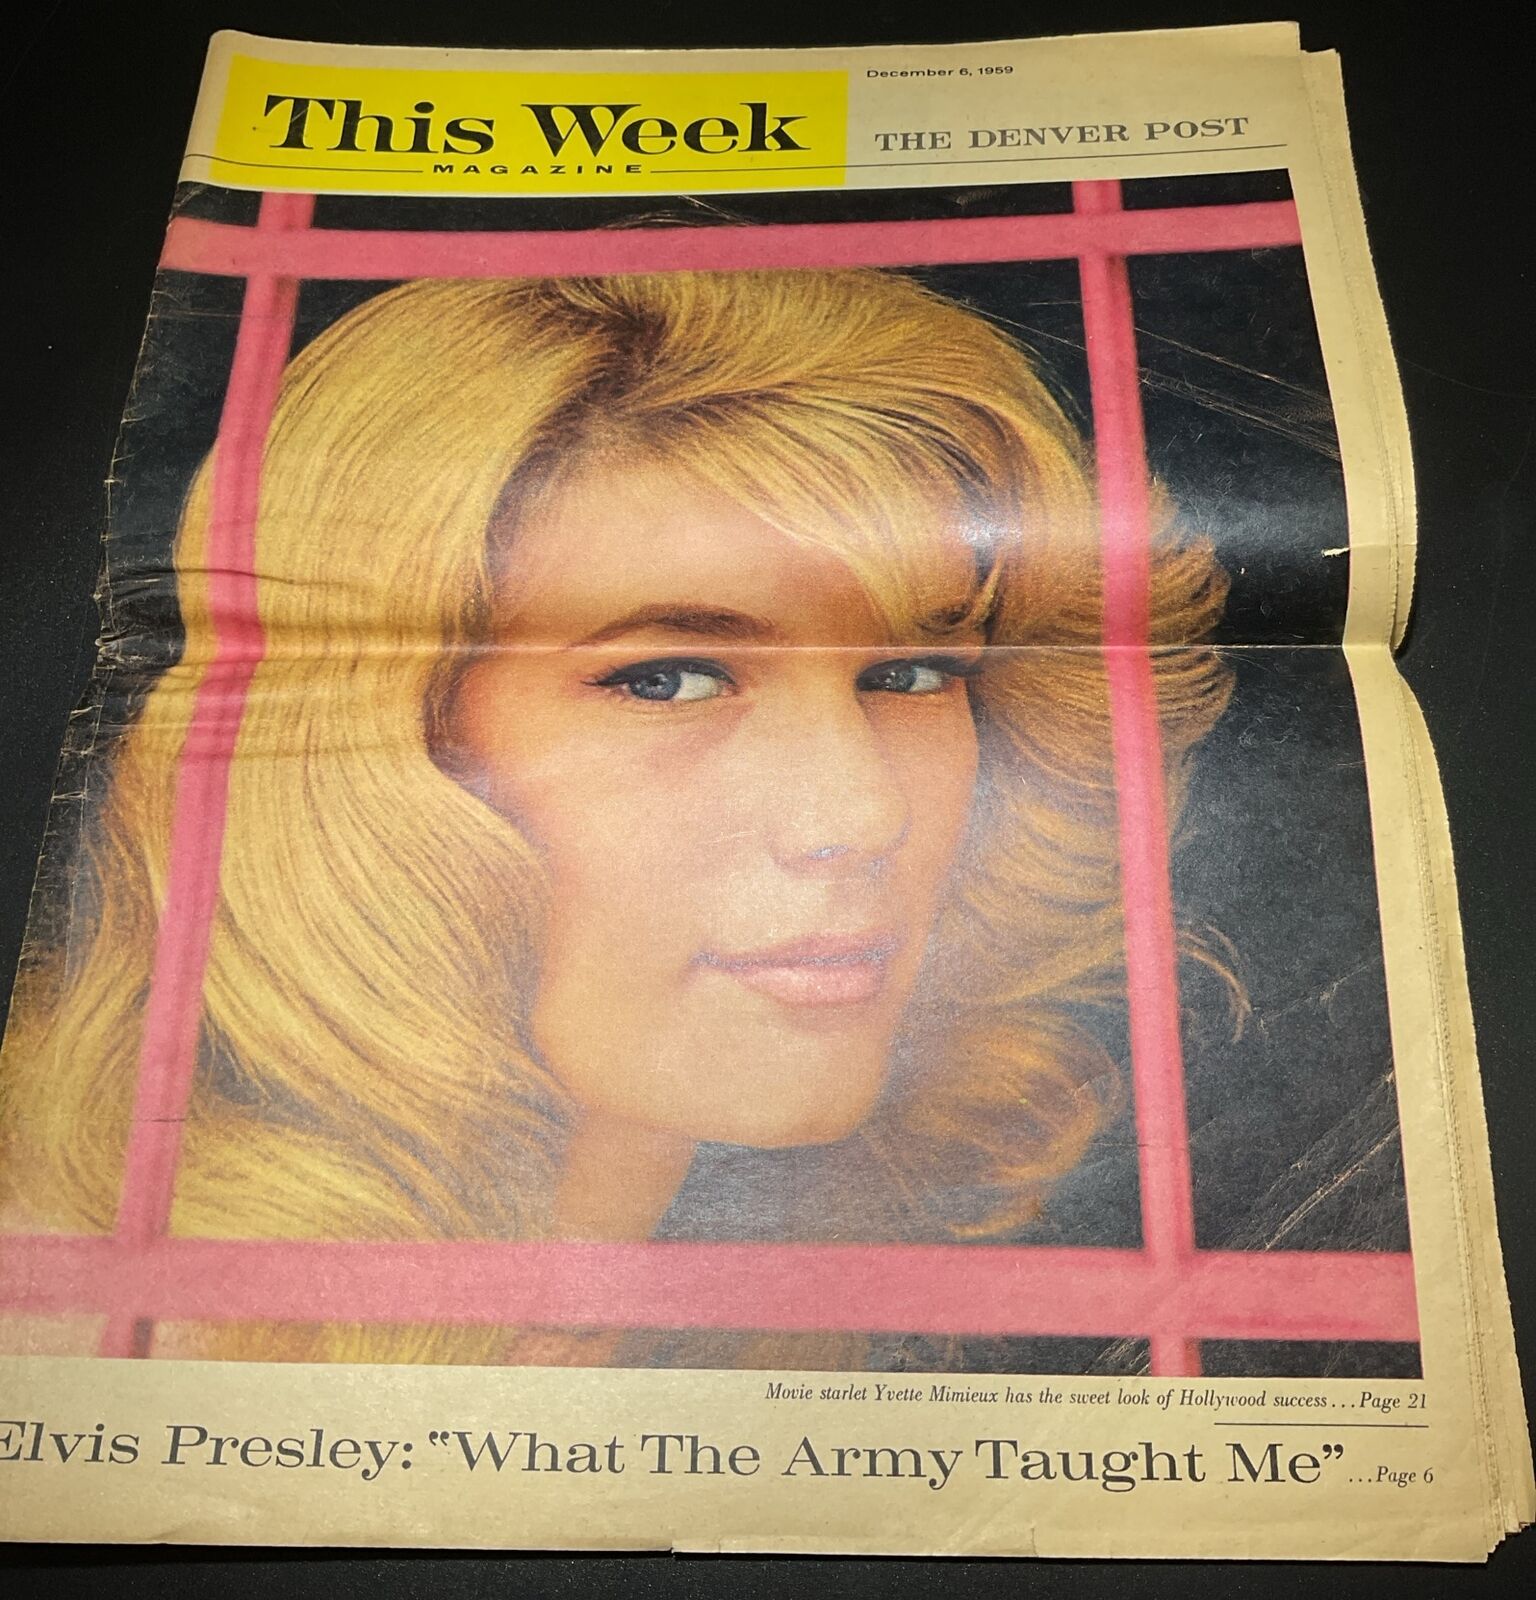 THIS WEEK Magazine - December 6, 1959 - Elvis Presley What the Army Taught Me